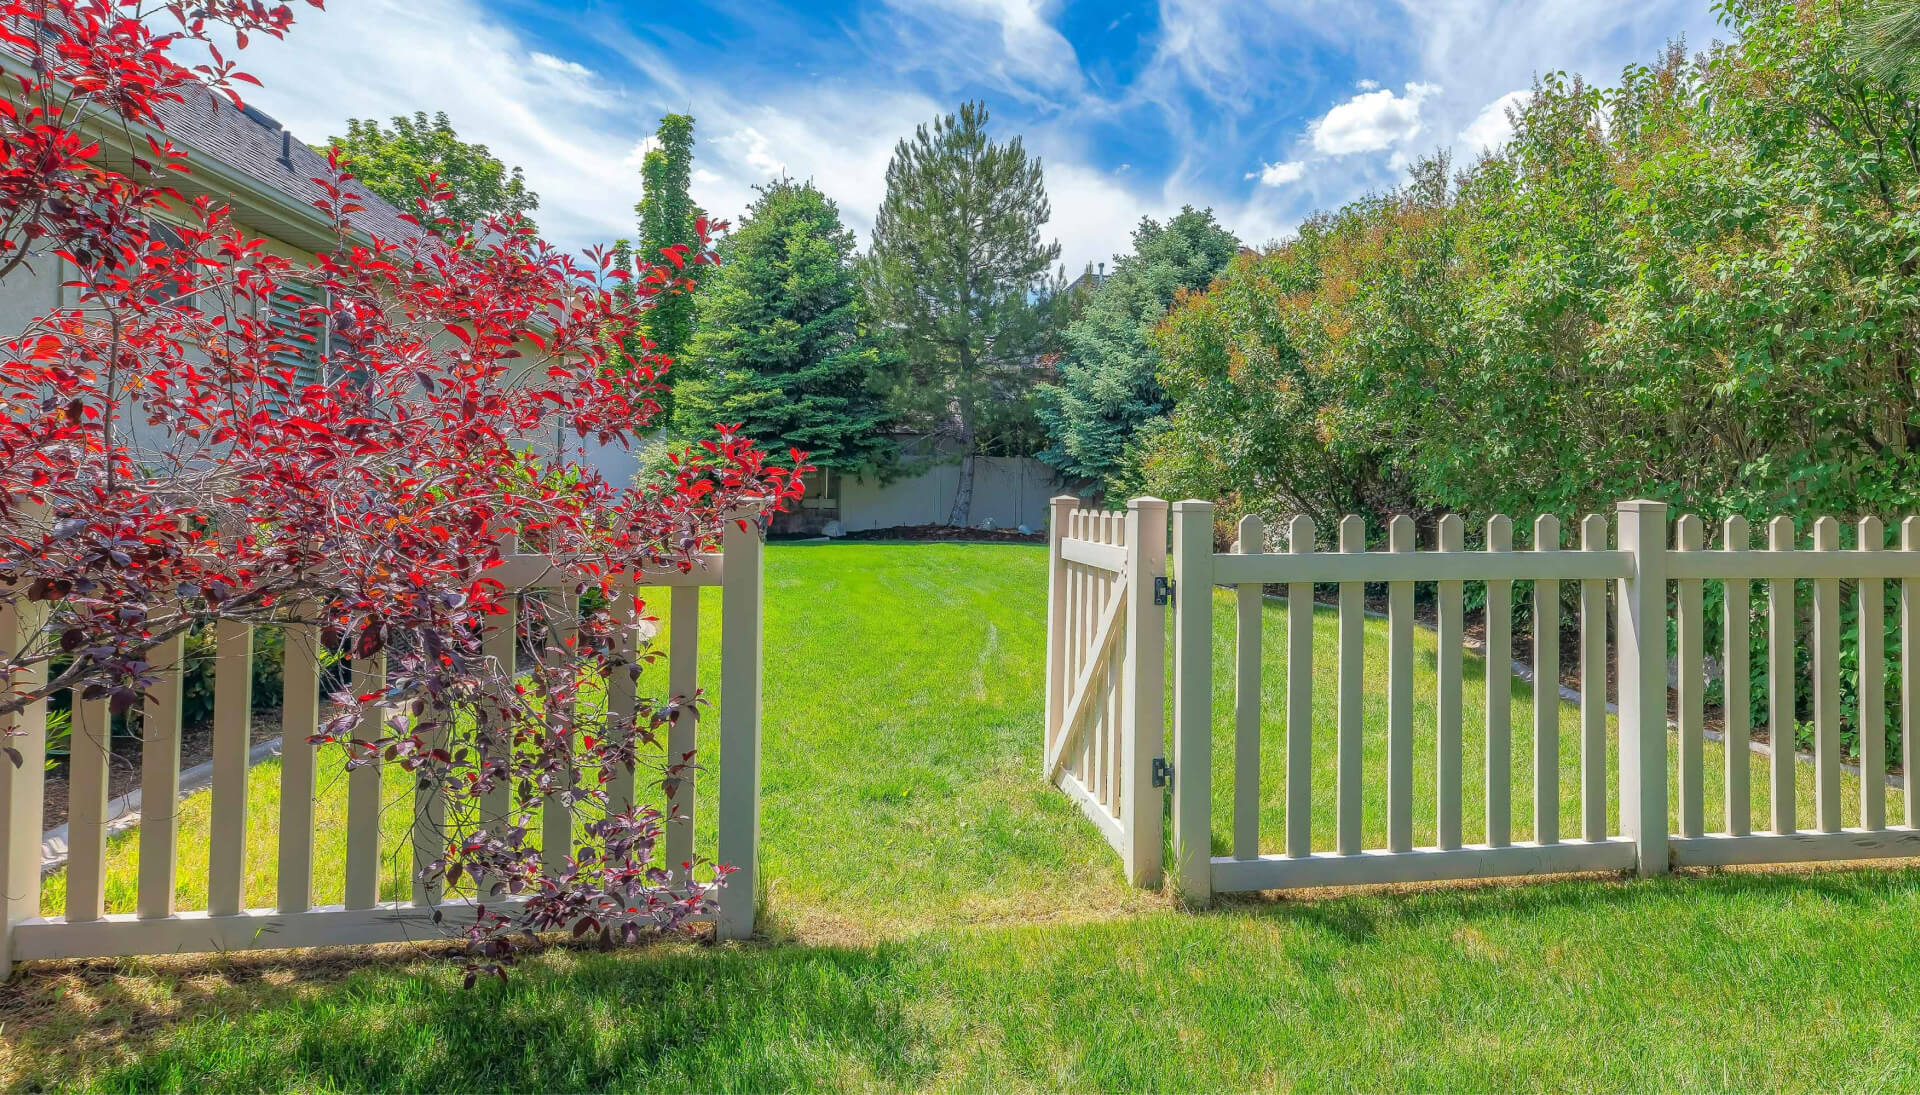 A functional fence gate providing access to a well-maintained backyard, surrounded by a wooden fence in Baltimore